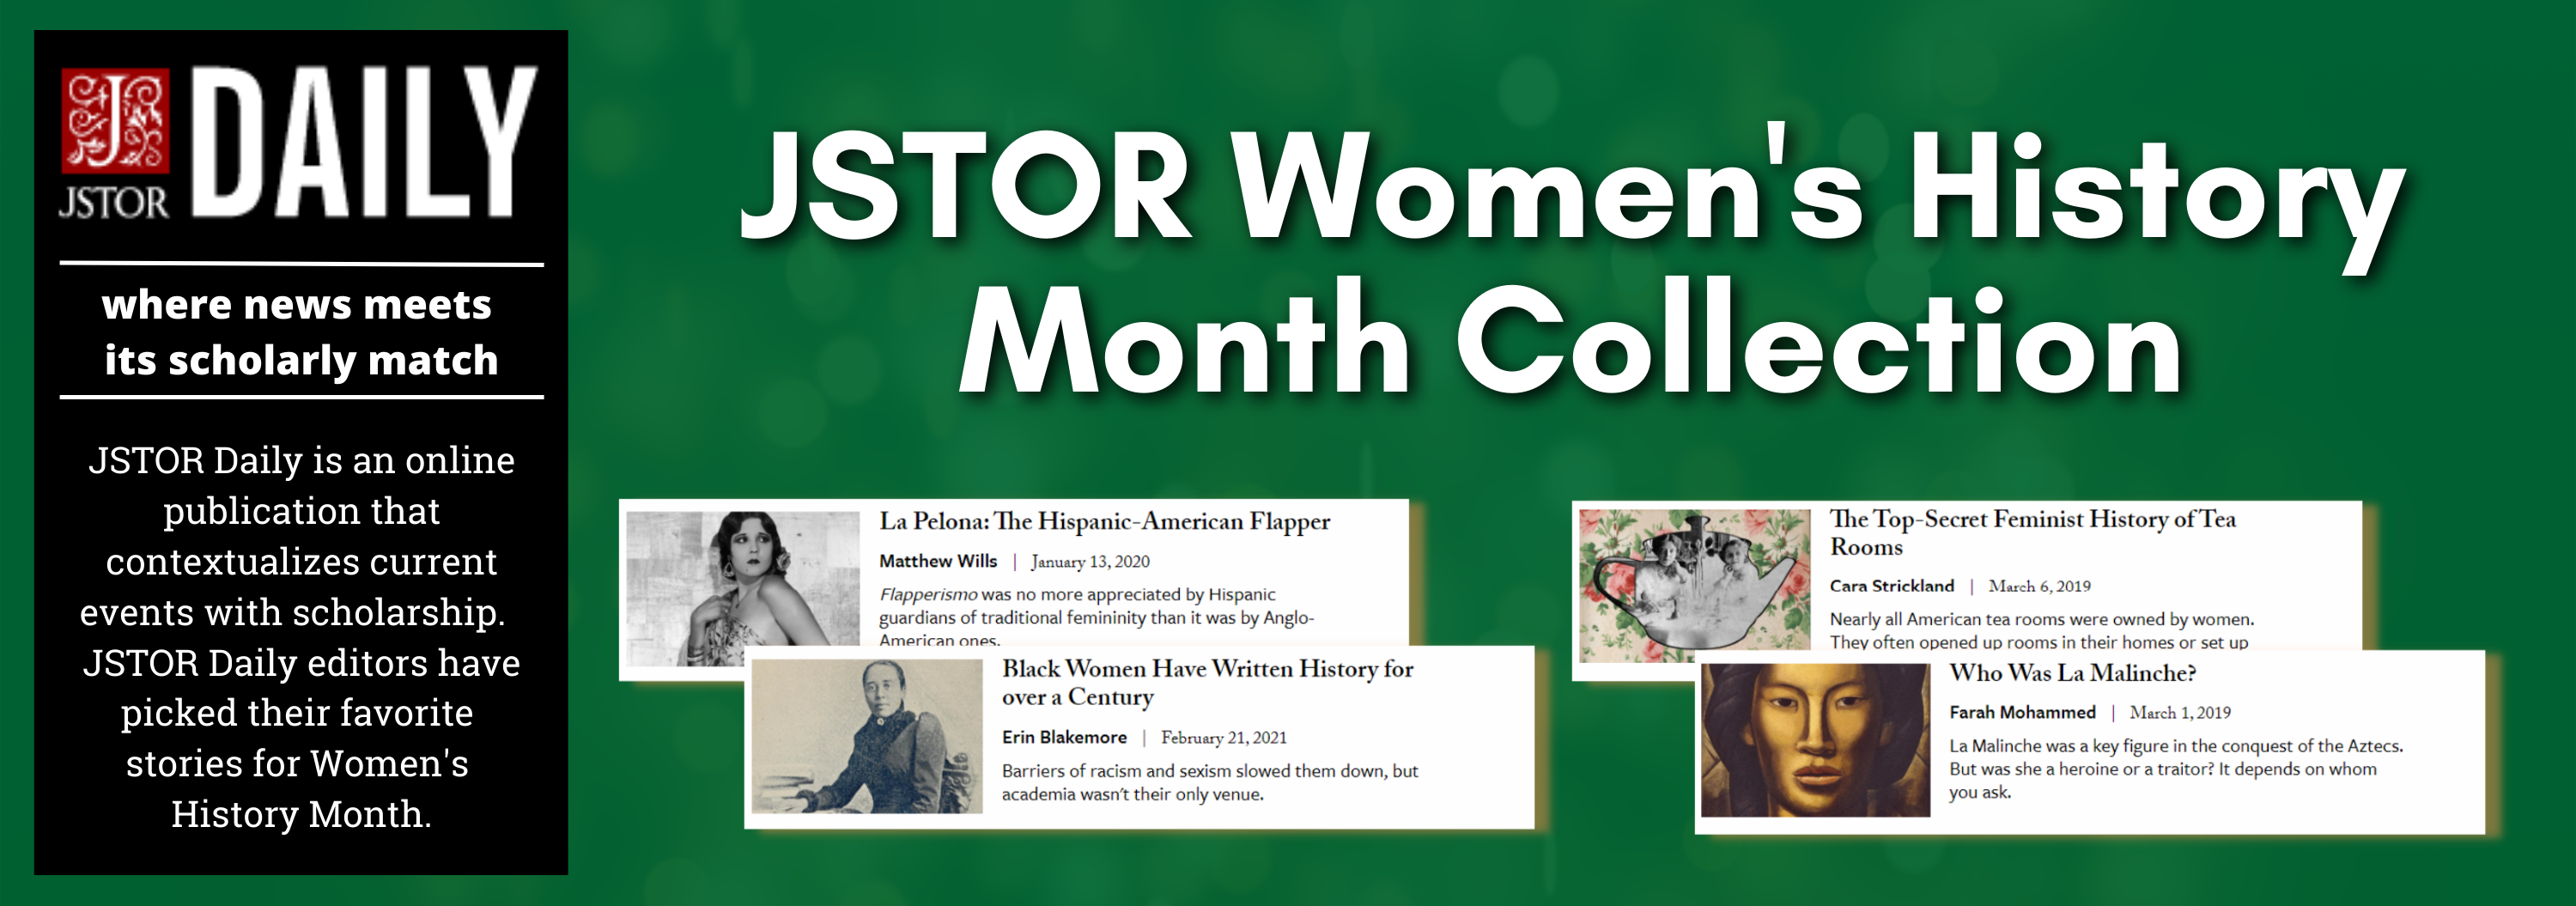 Women's History Month JSTOR Roundup